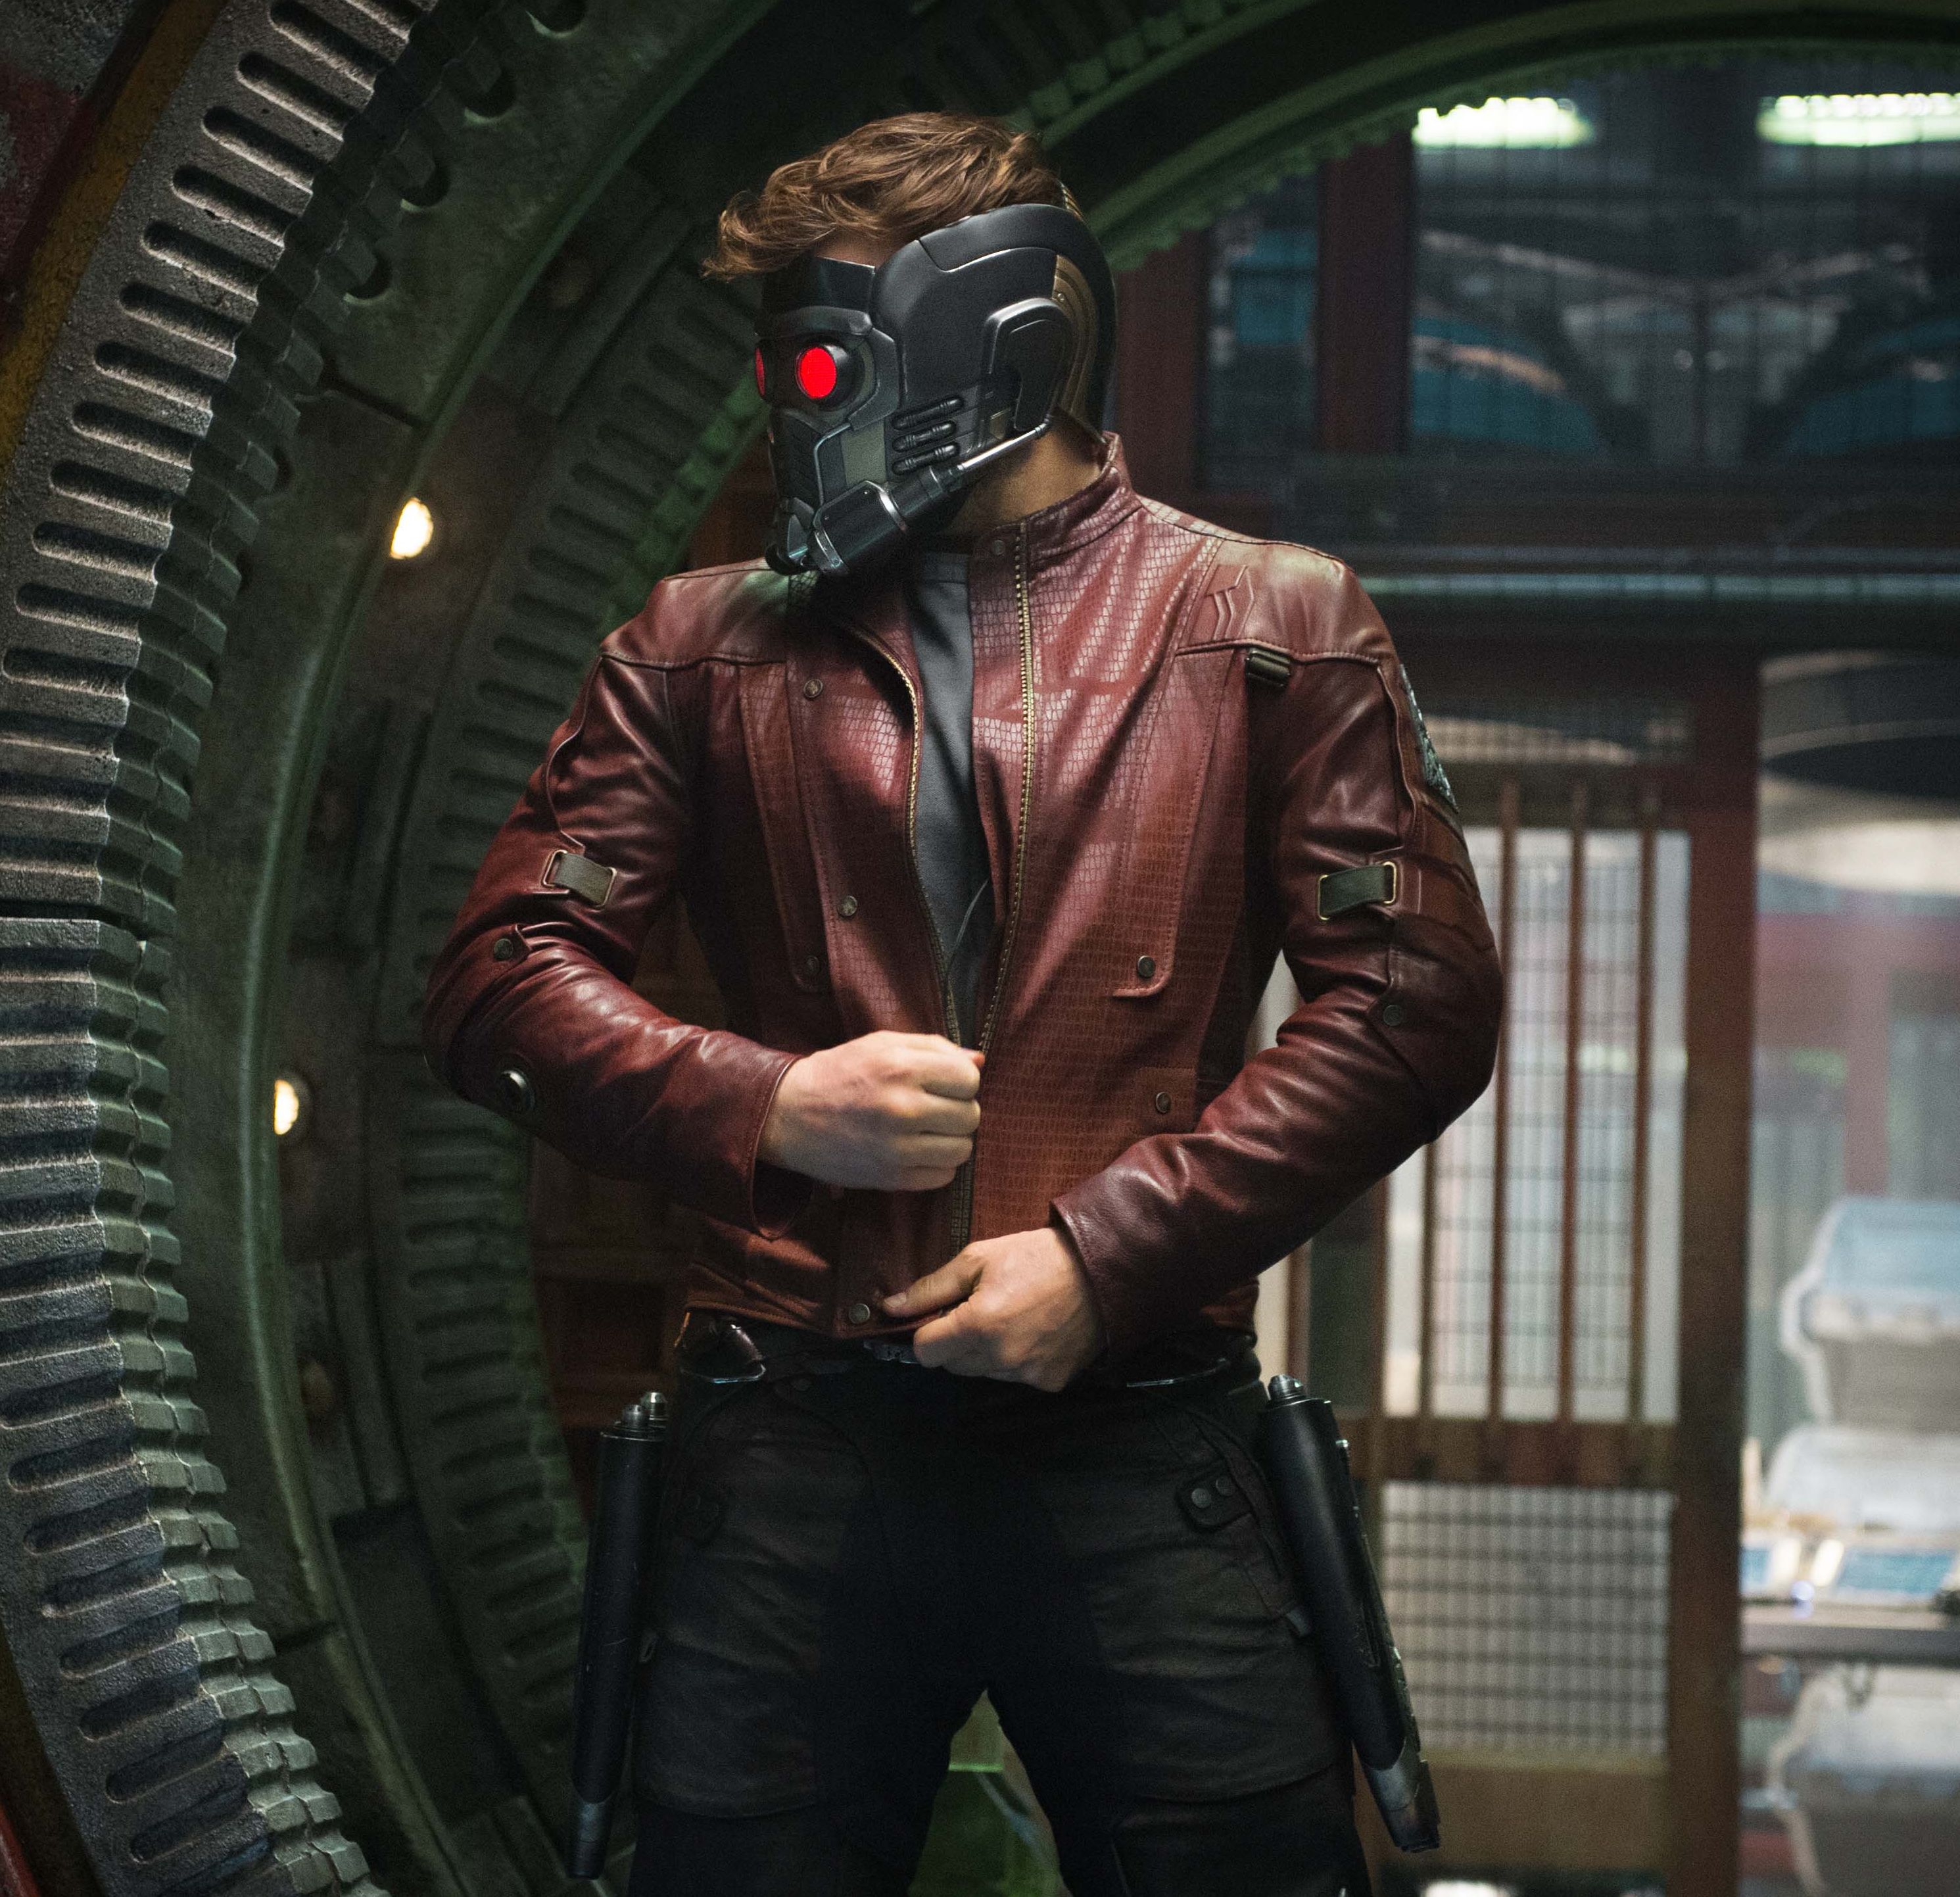 Peter Quill puts on mask